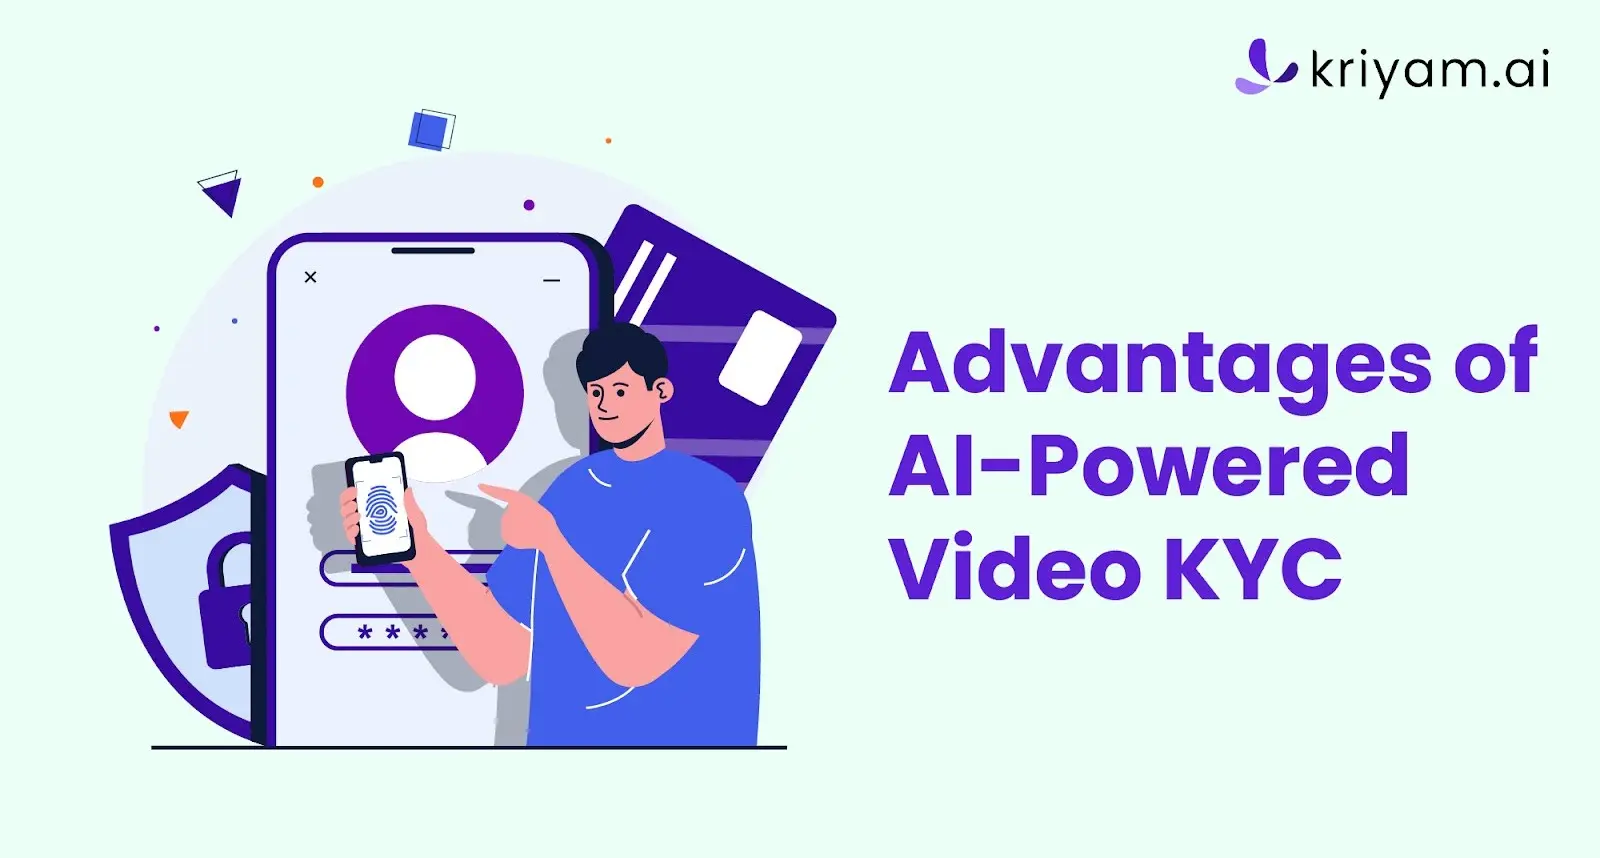 Advantages of AI-Powered Video KYC